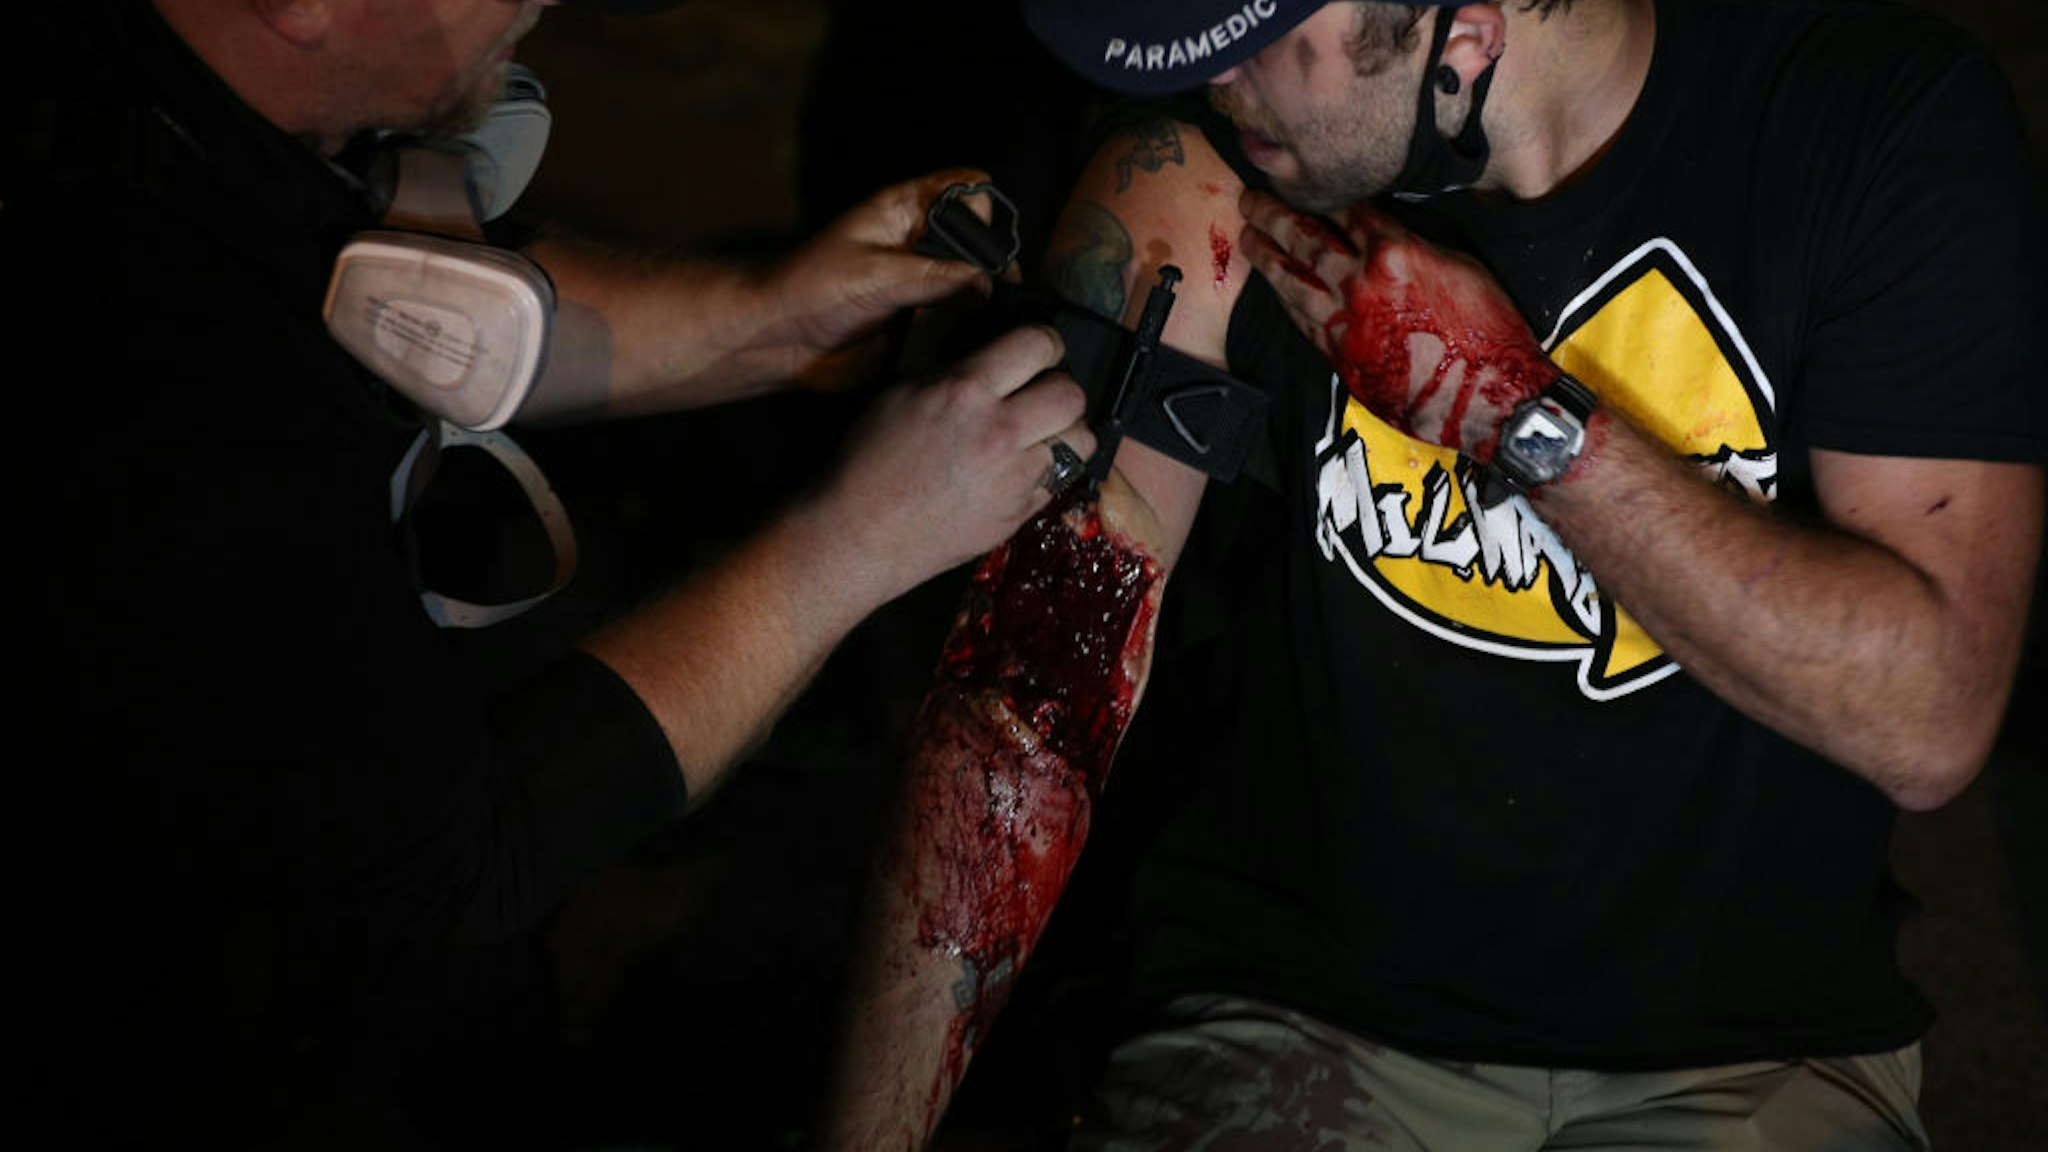 A man was shot in the arm as clashes between protesters and armed civilians who protect the streets of Kenosha against the arson during the third day of protests over the shooting of a black man Jacob Blake by police officer in Wisconsin, United States on August 25, 2020.